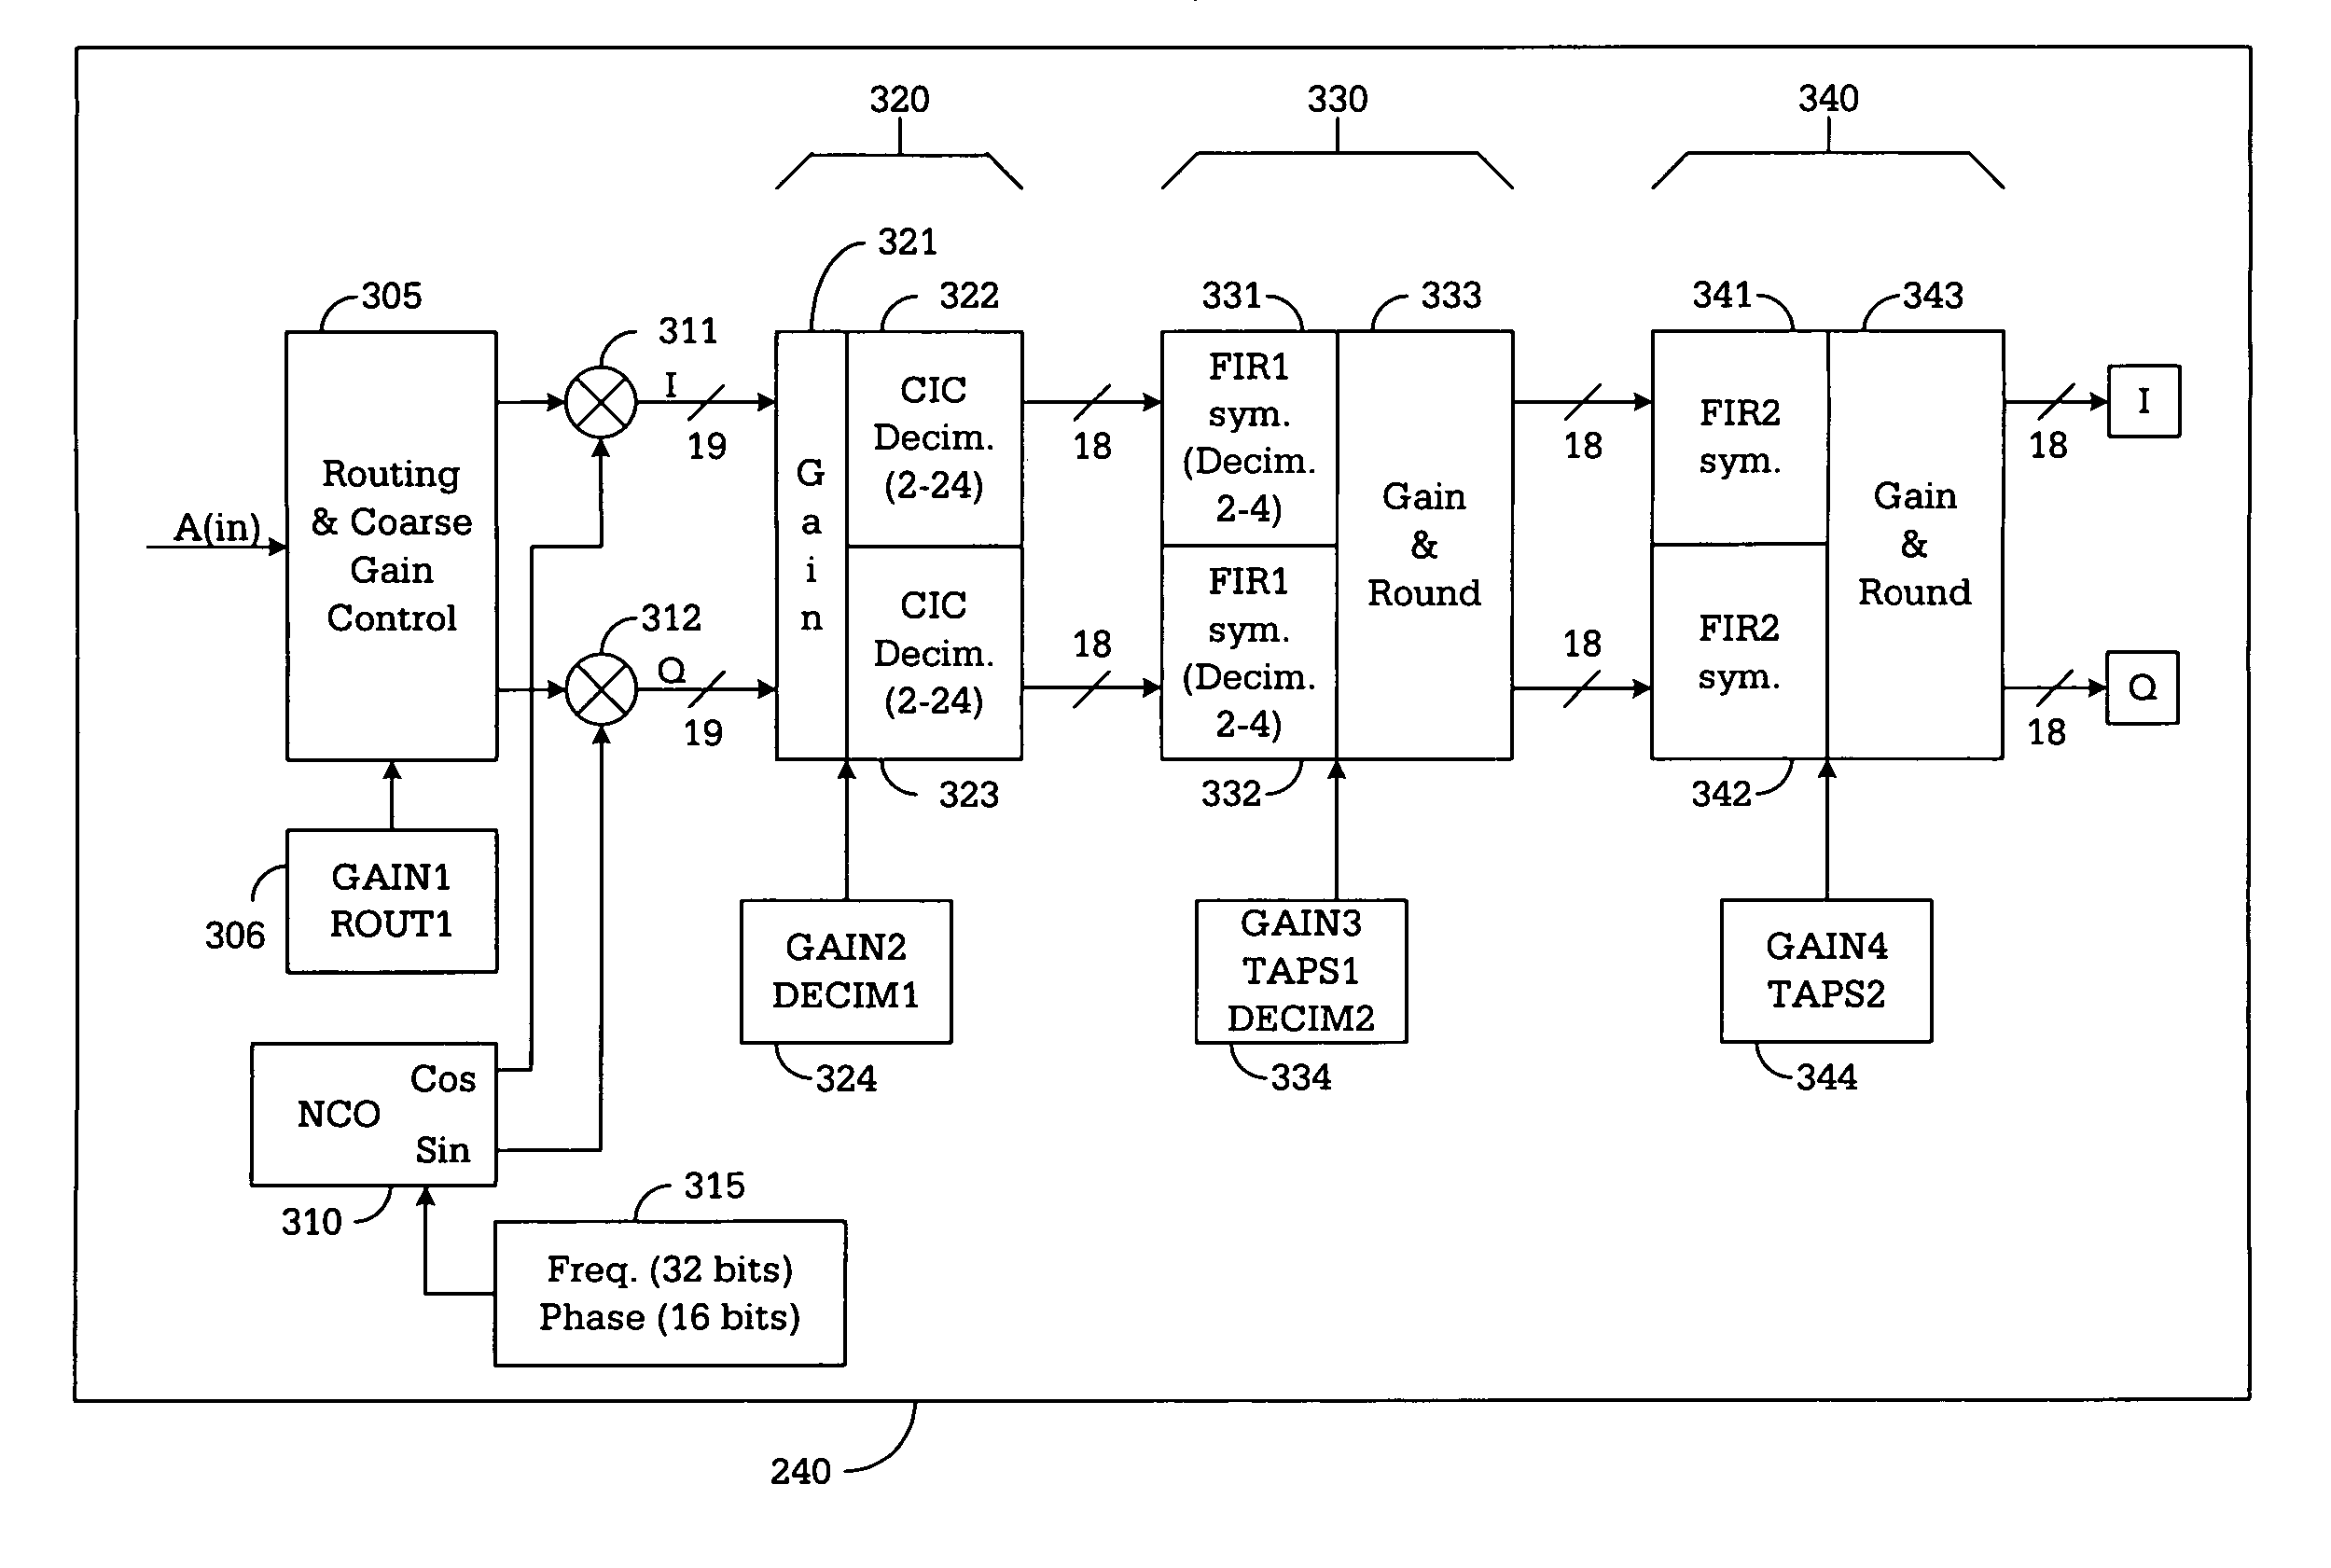 Apparatus and method for digital down-conversion in a multi-mode wireless terminal